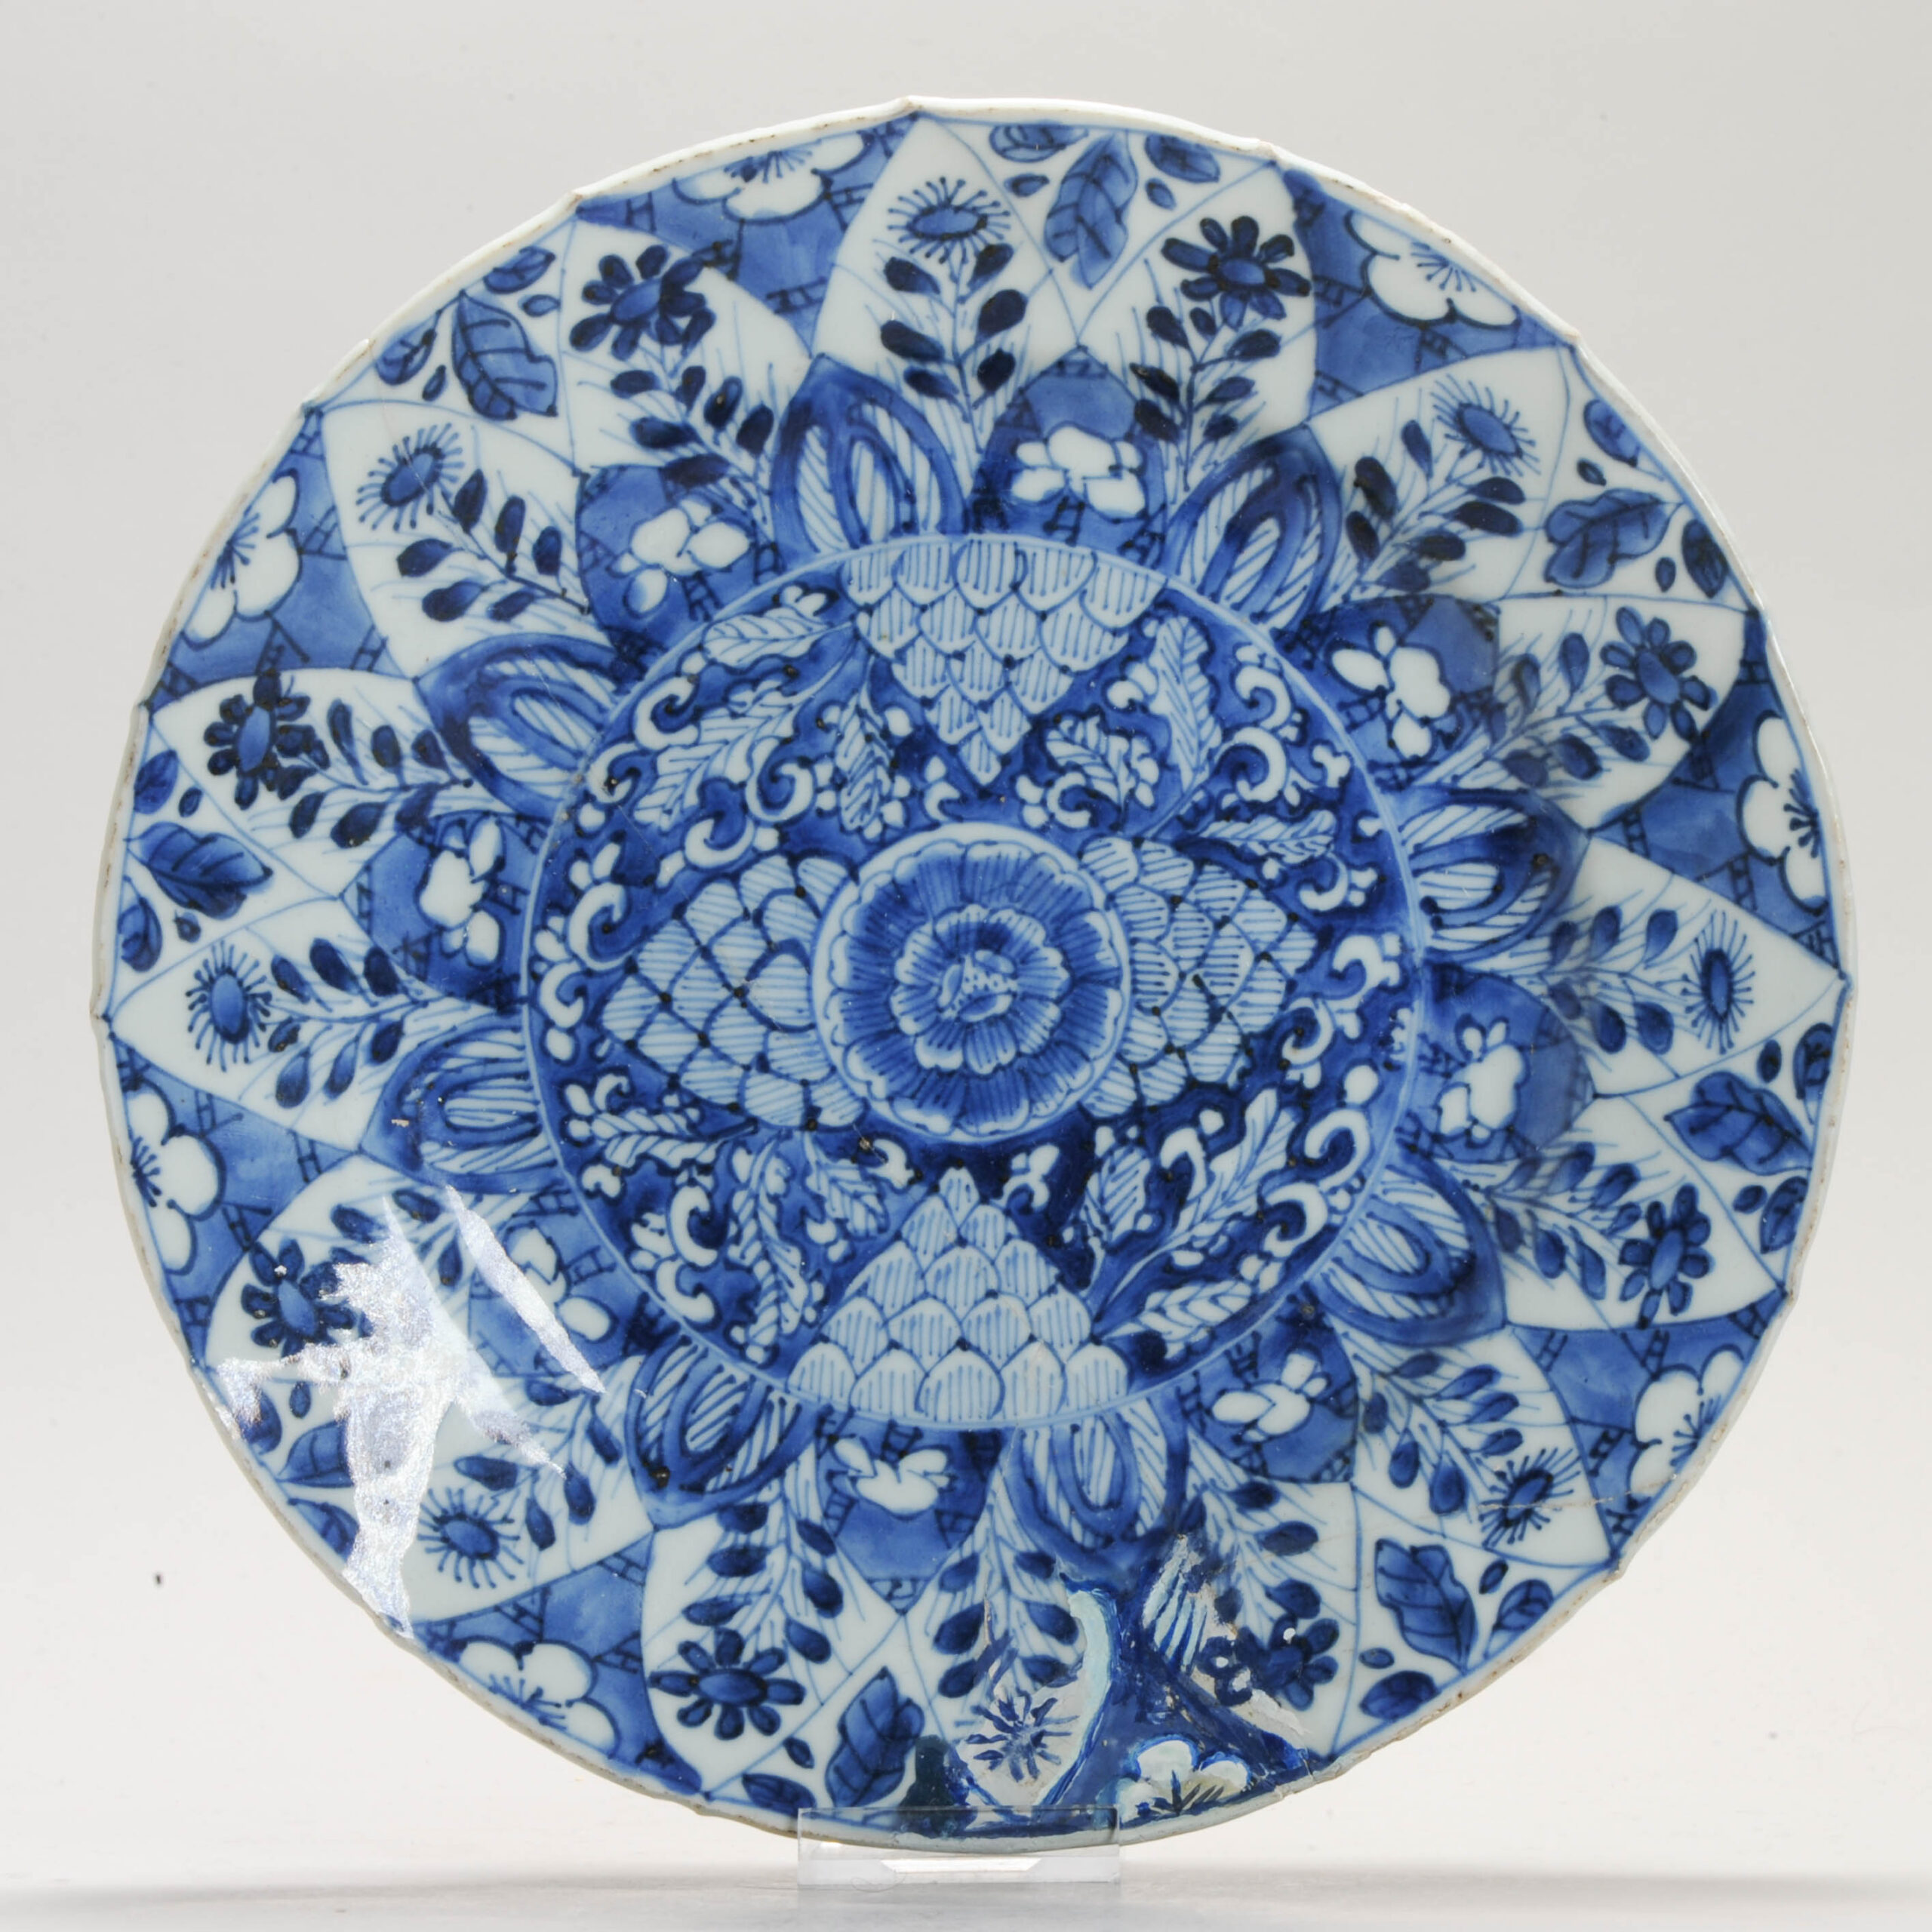 1148 Lovely Kangxi or Yongzheng Blue and White plate With Interesting Decoration